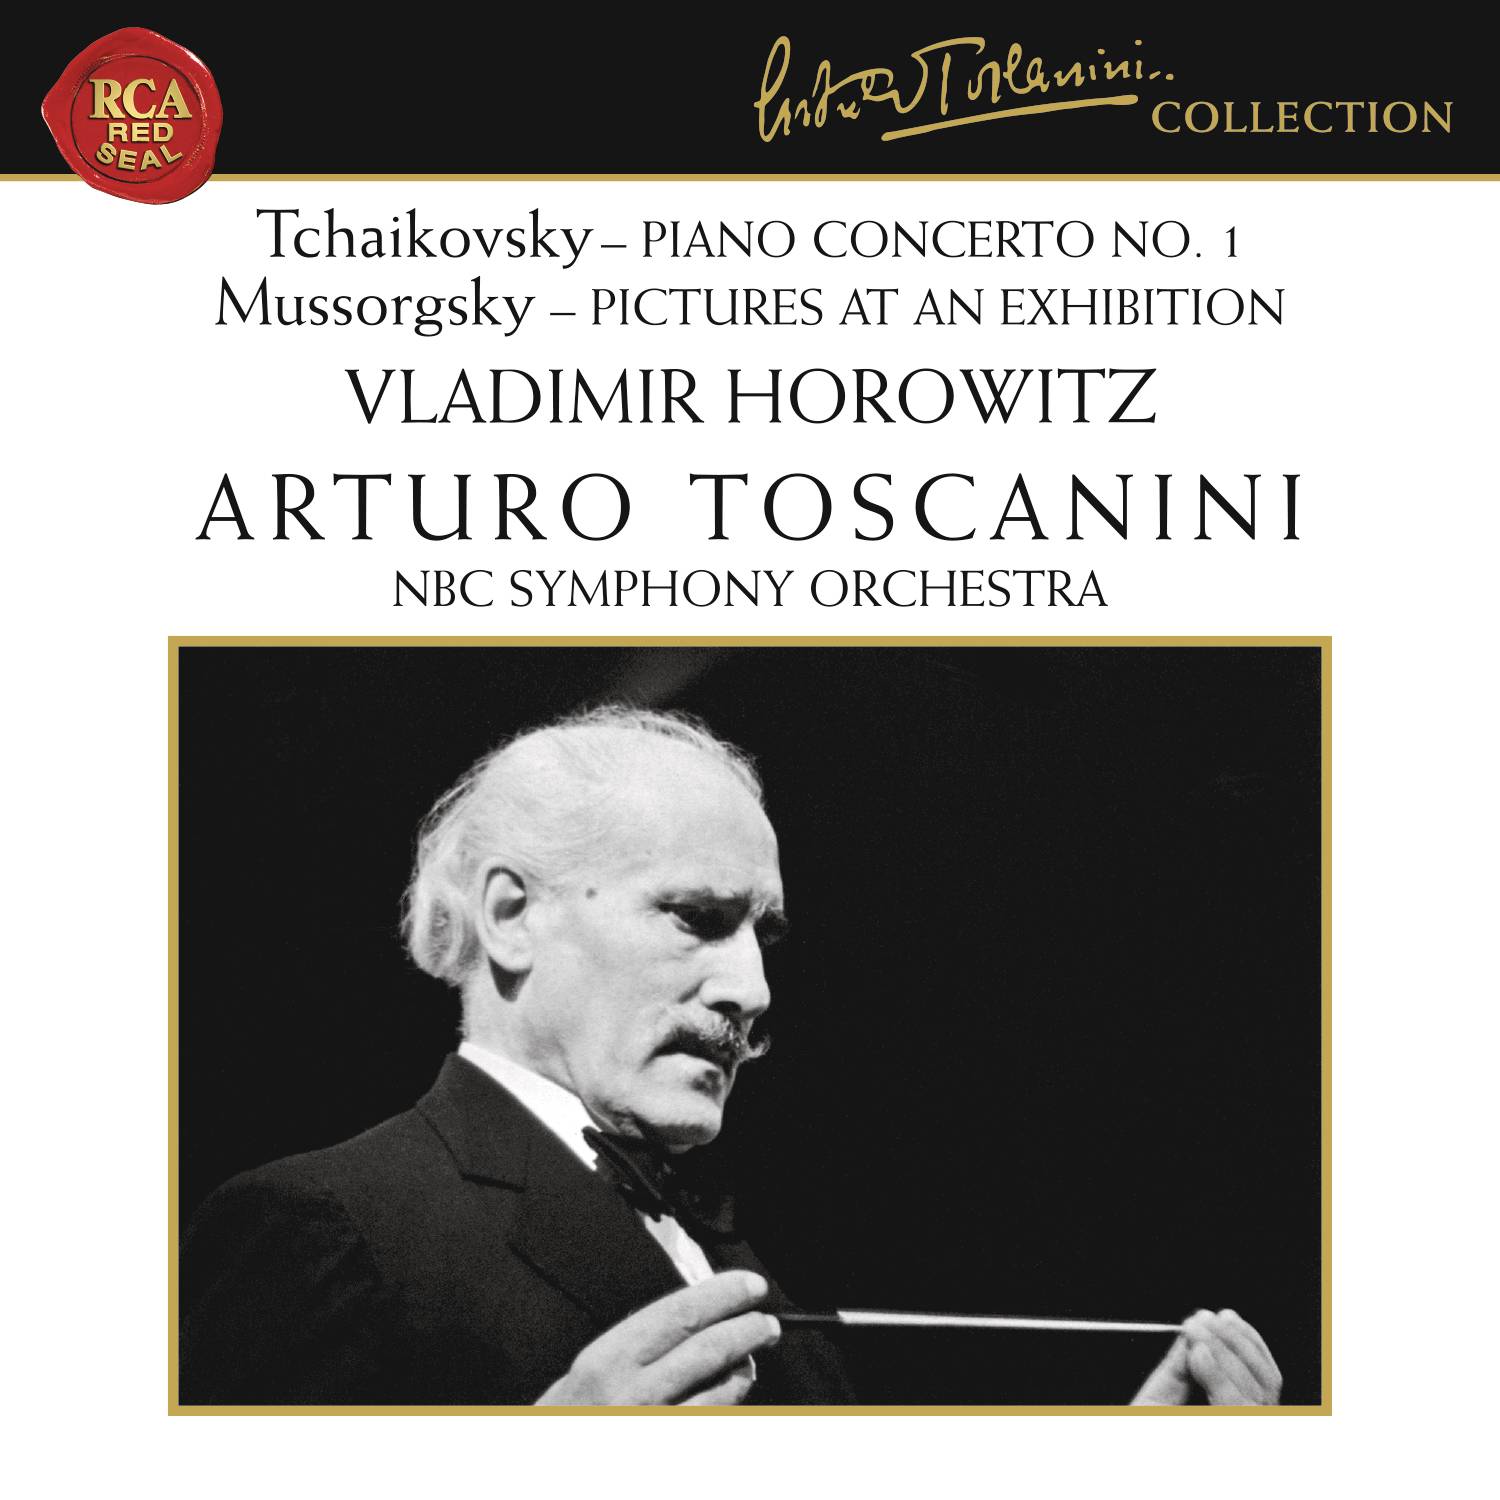 Tchaikovsky: Piano Concerto No. 1 in B-Flat Minor, Op. 23 - Mussorgsky: Pictures at an Exhibition